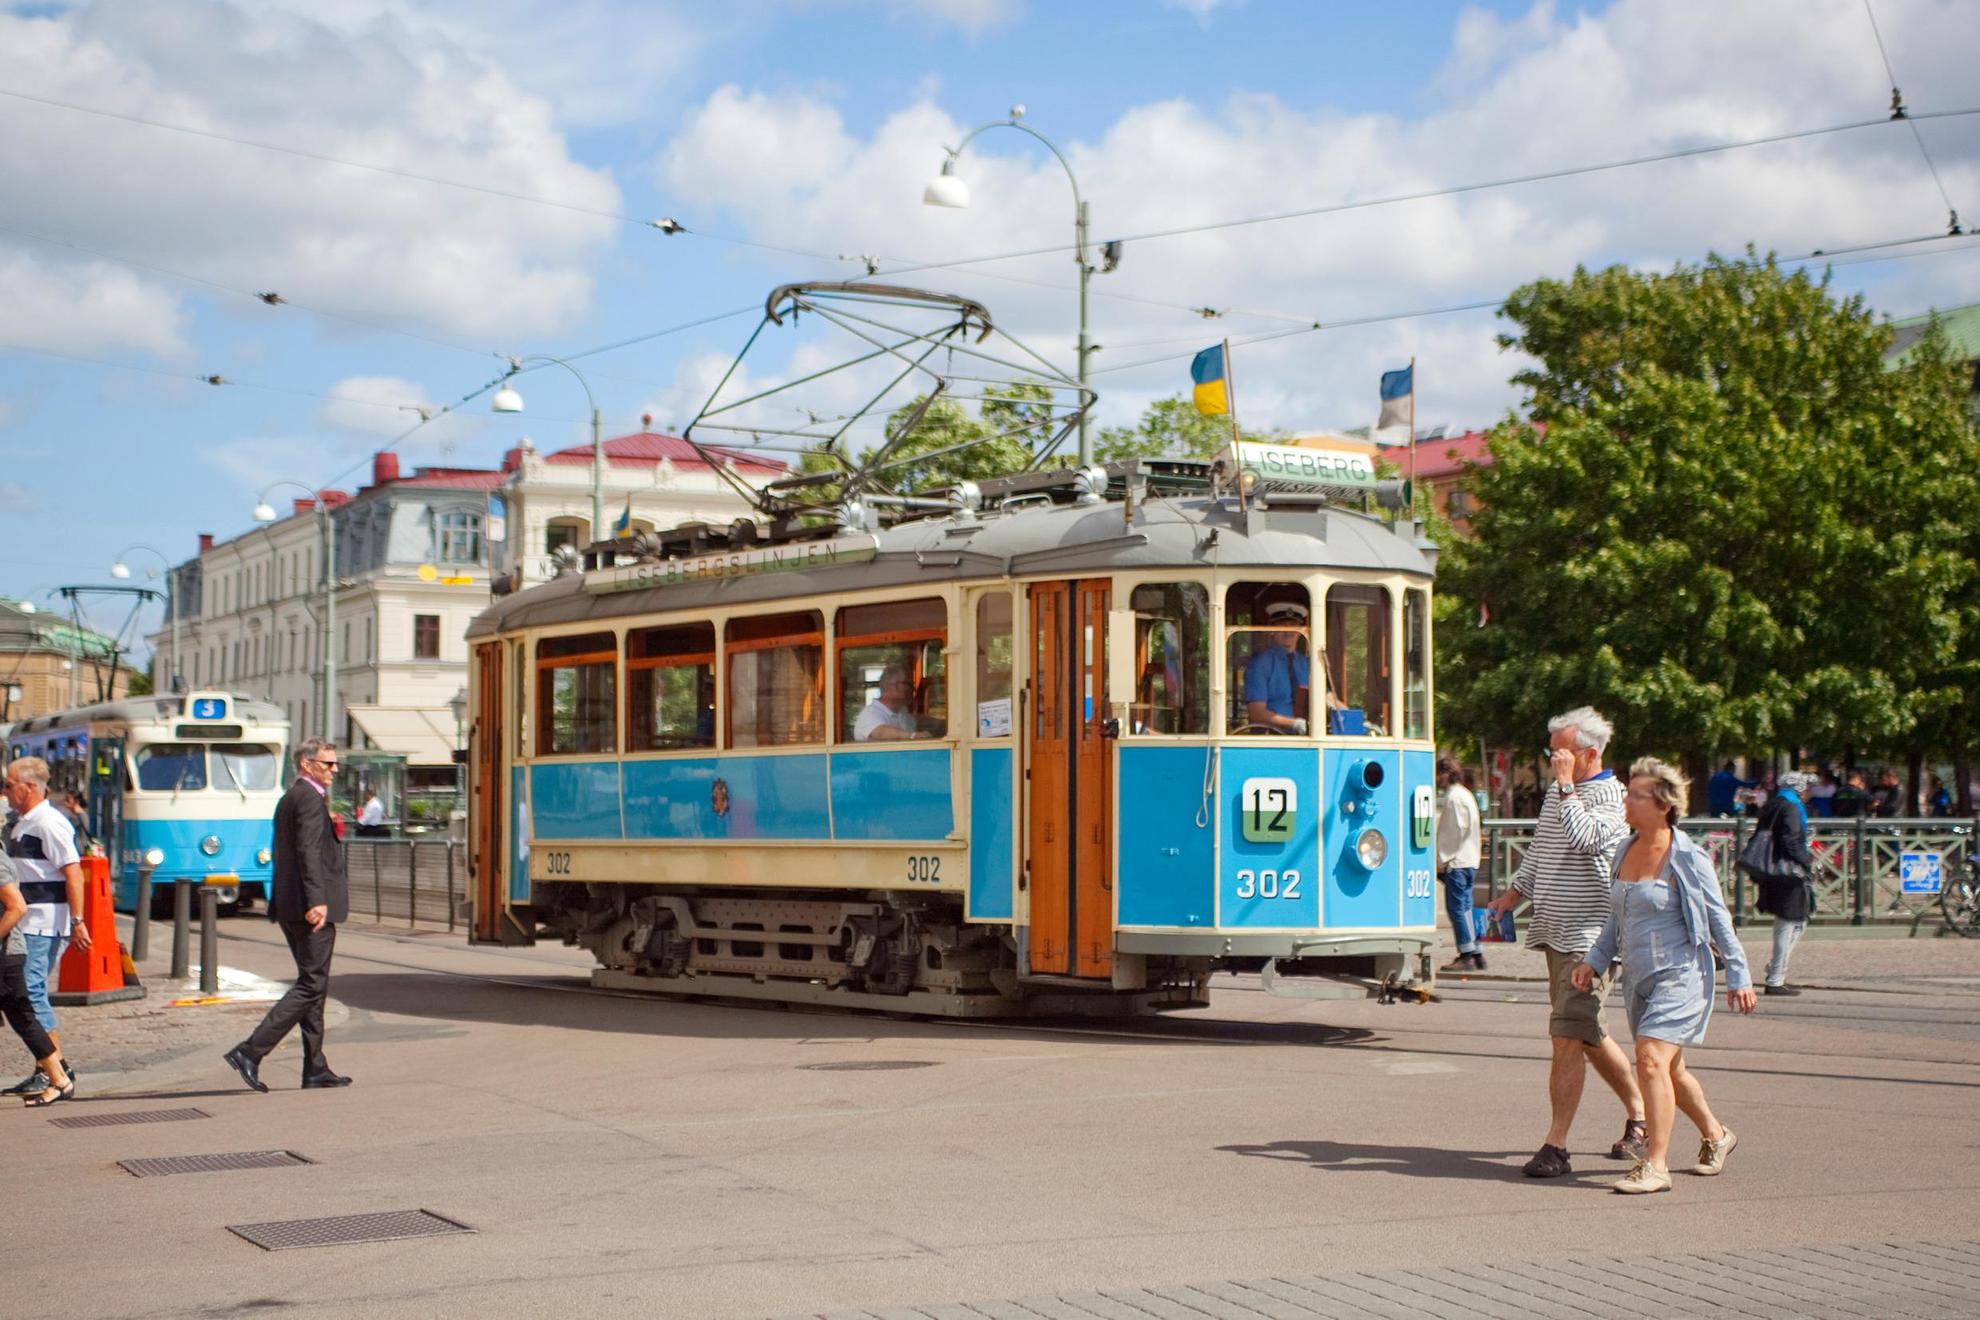 An old-fashioned tram runs on the street in the centre of Gothenburg. It is summer and daylight.